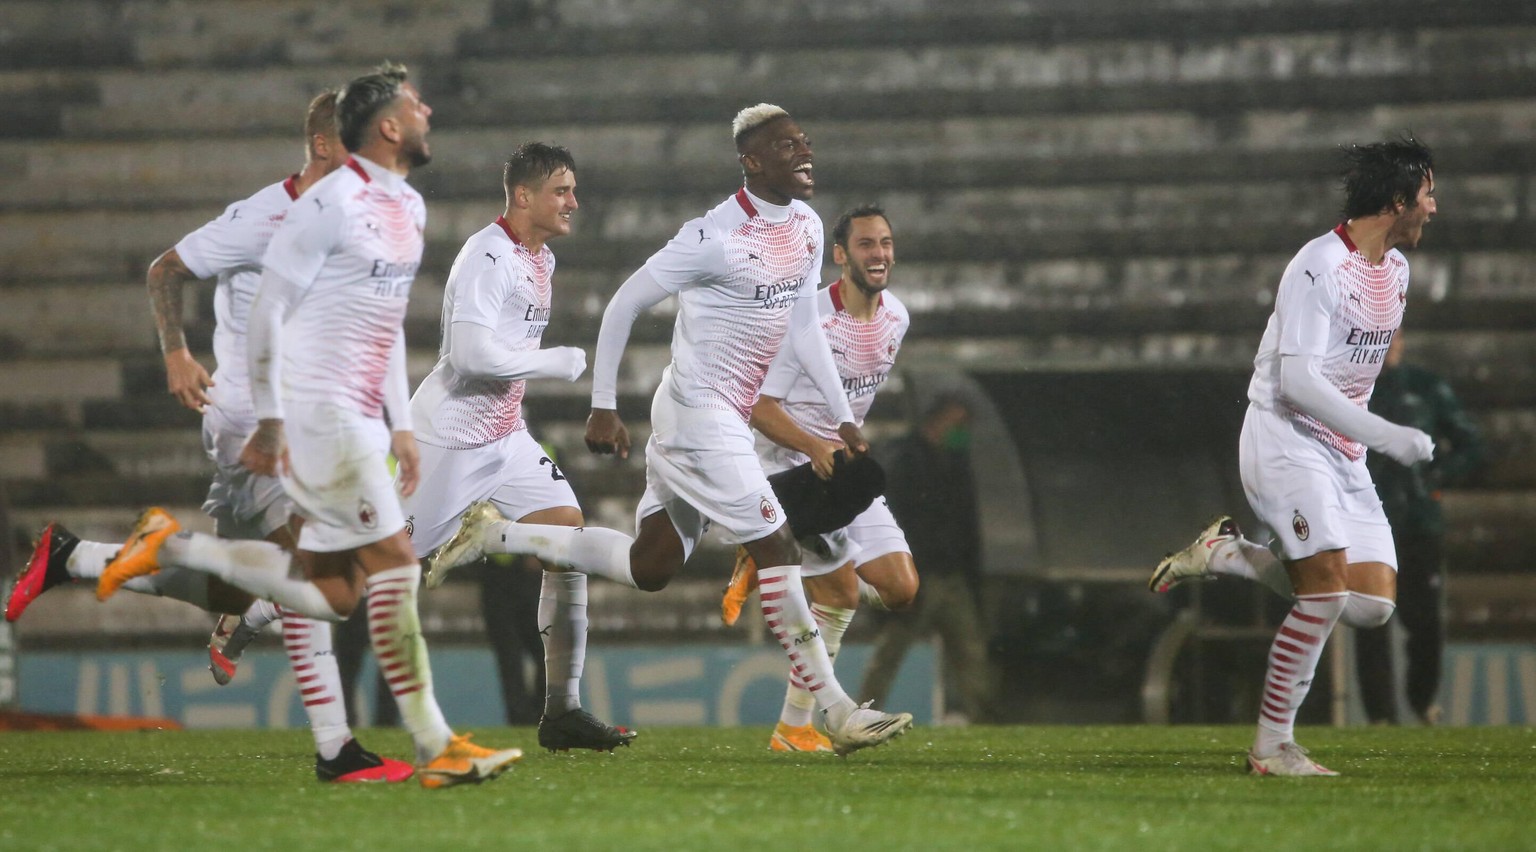 Rio Ave FC v AC Milan Europa League 01/10/2020. Qualifying Round Milan players celebrate their victory after the penalty shoot-out during the Europa League match between Rio Ave FC and AC Milan at Est ...